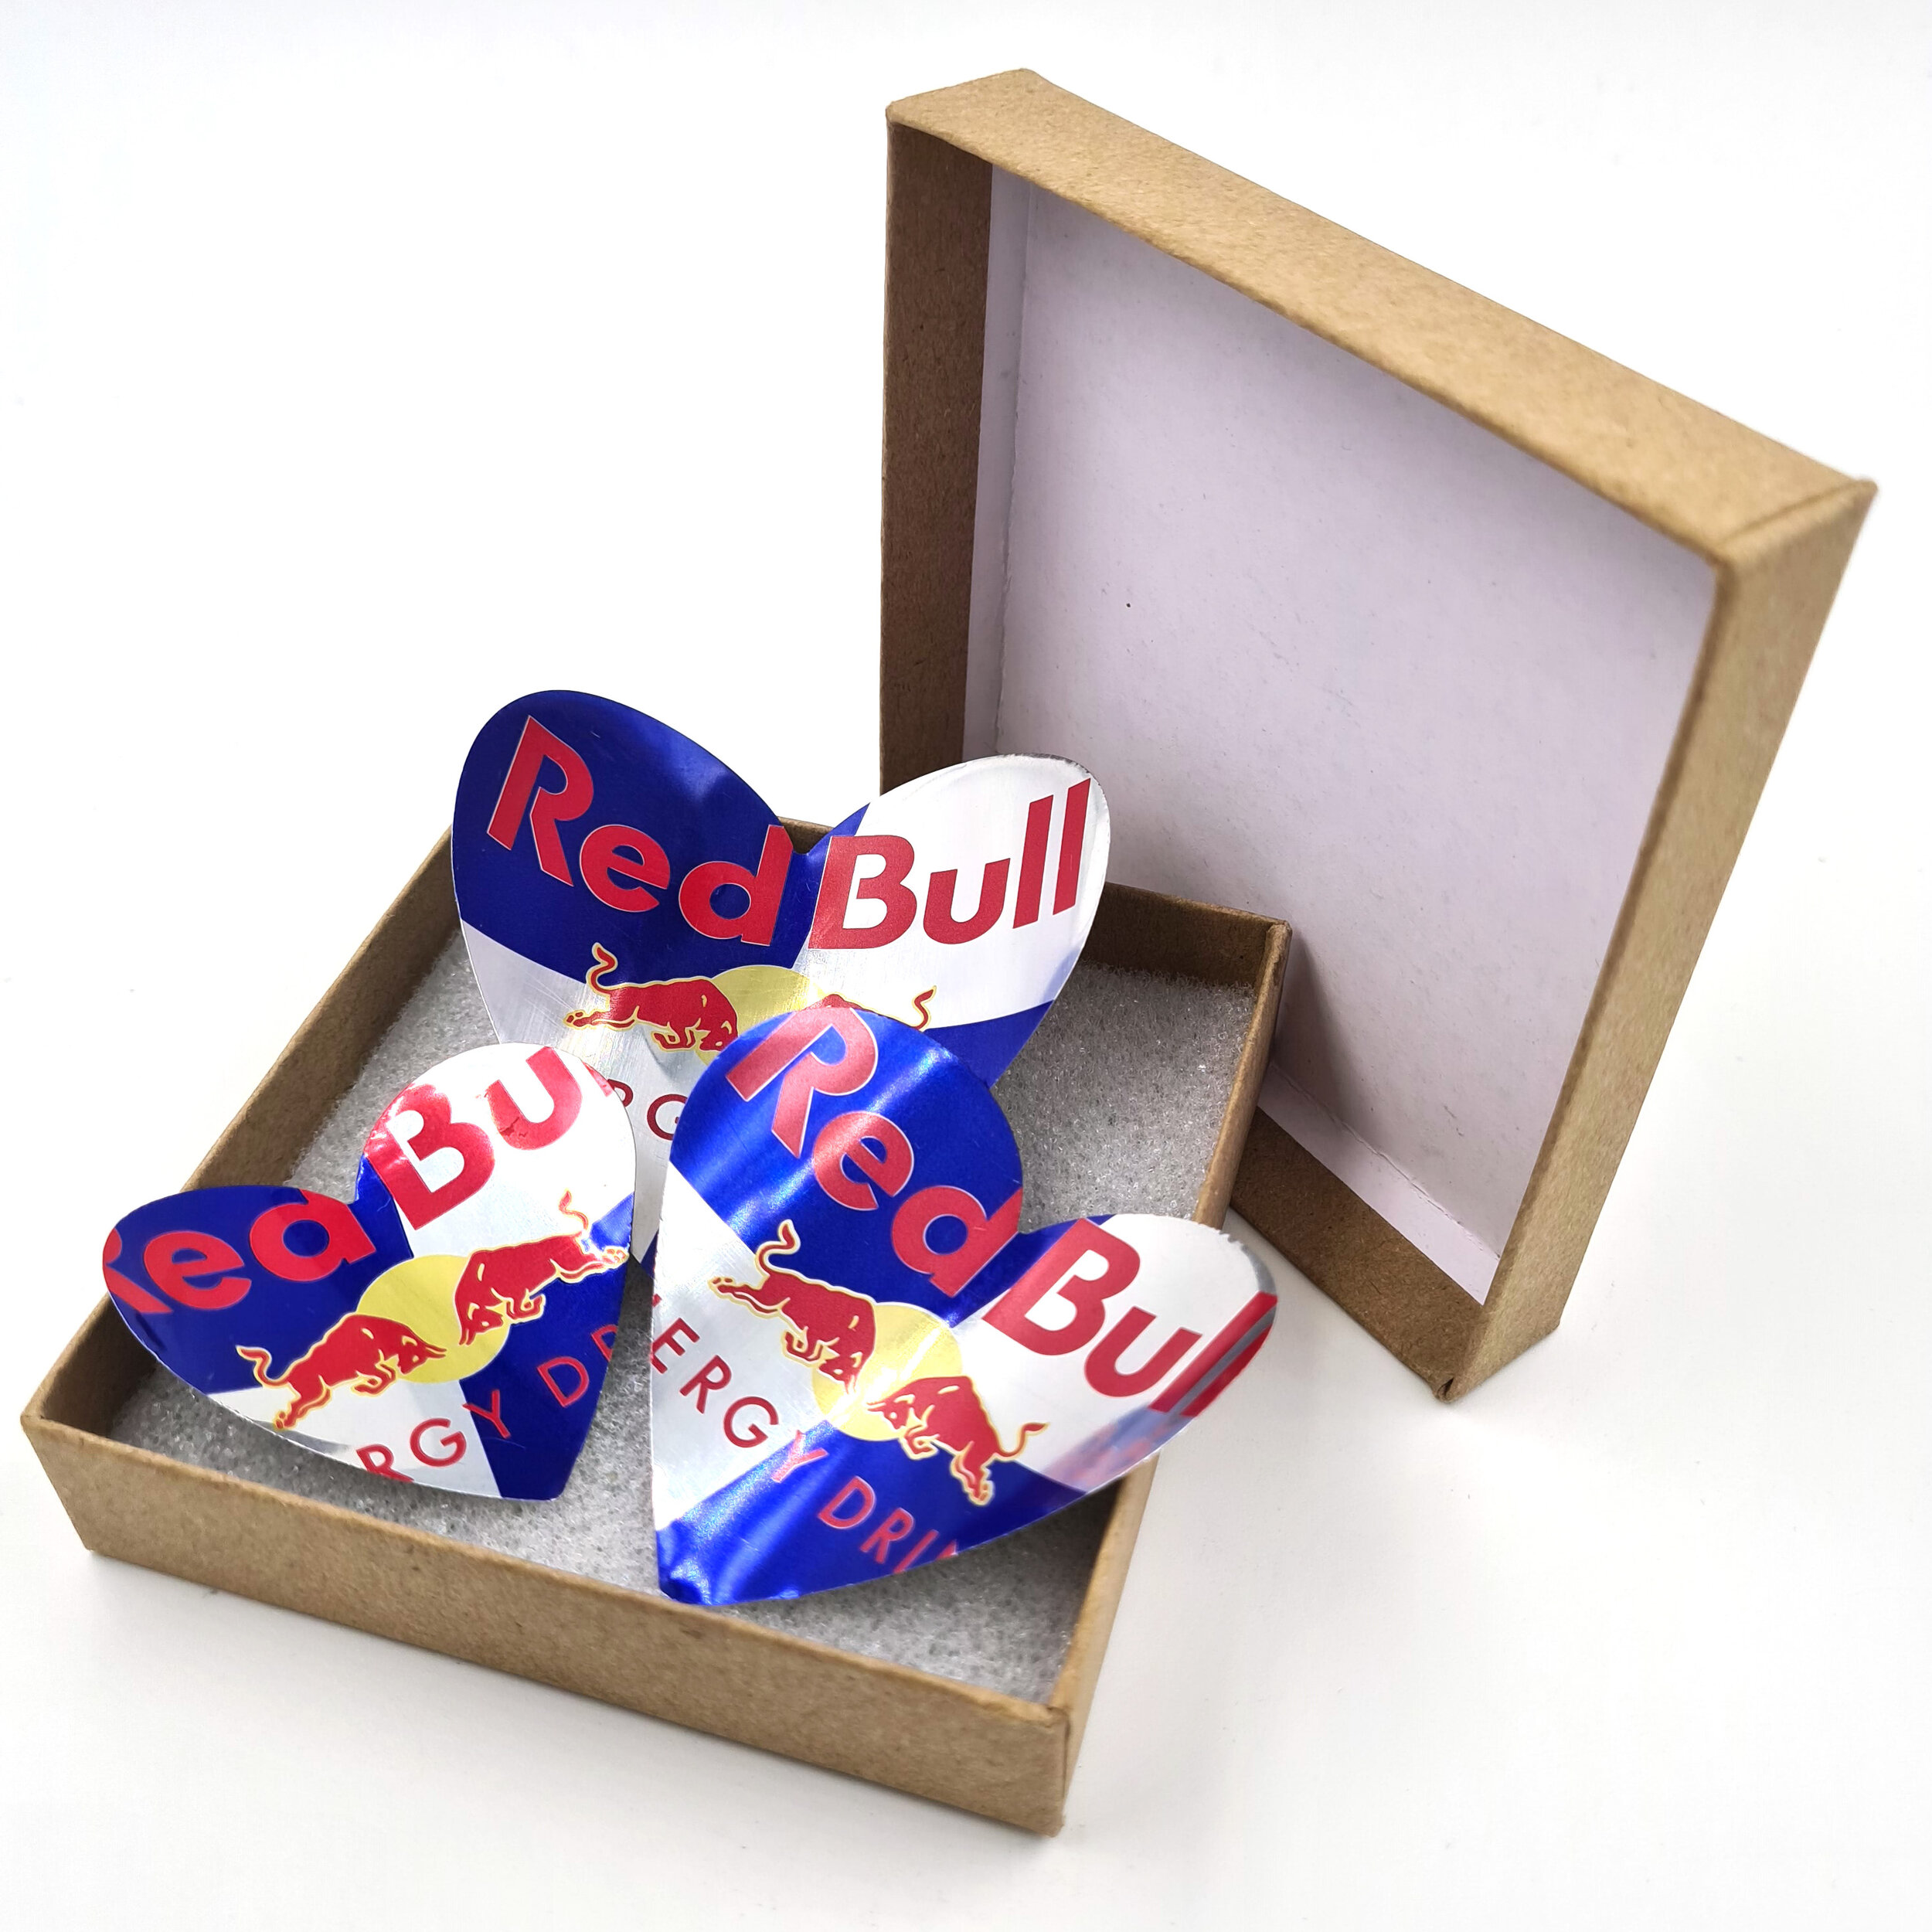 Redbull blue red and silver Heart Can Magnets in box